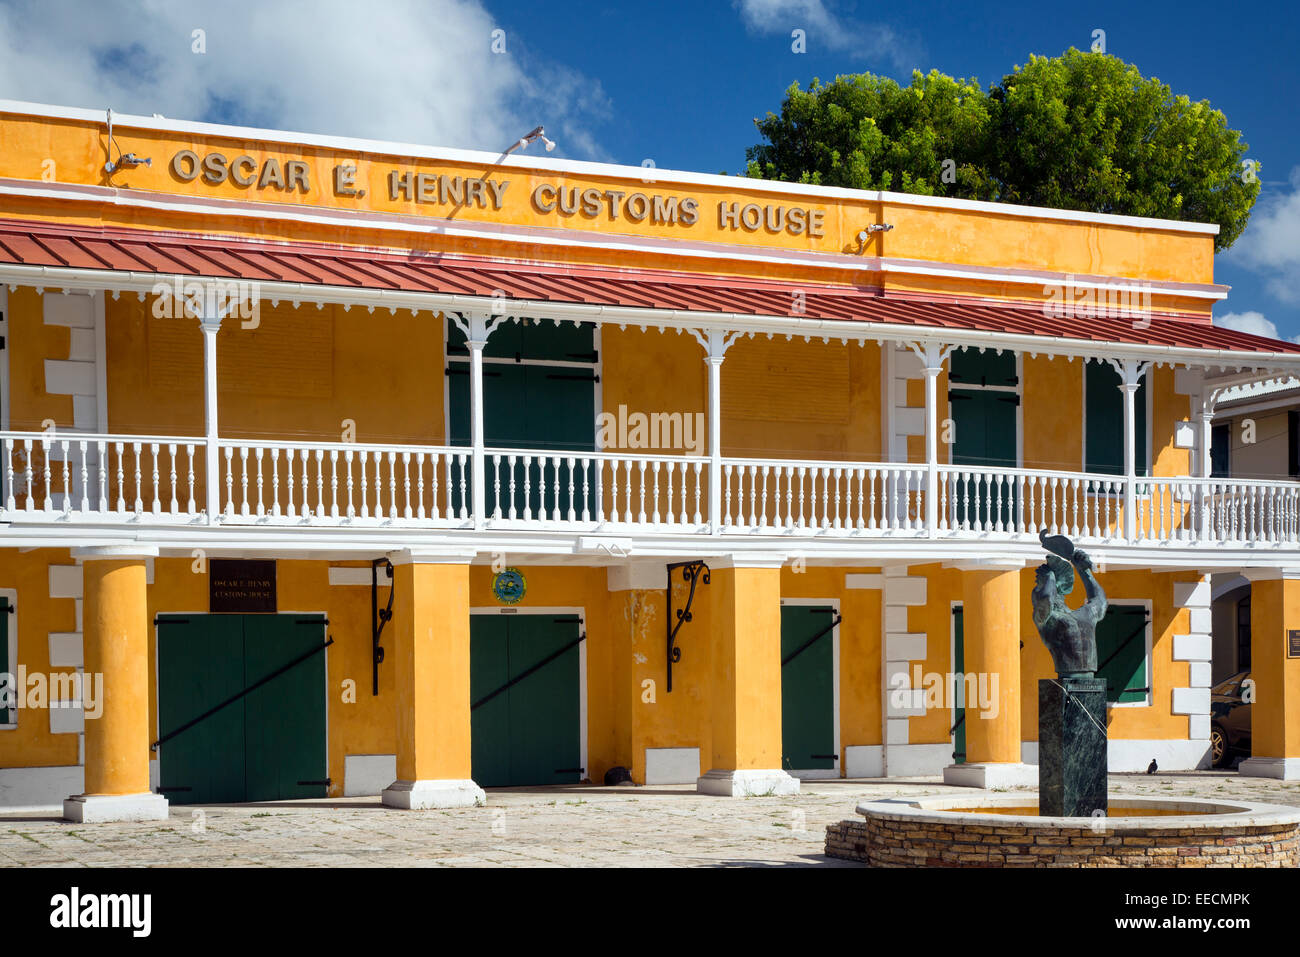 Oscar E. Henry Customs House along the waterfront, Frederiksted, St Croix, US Virgin Islands Stock Photo